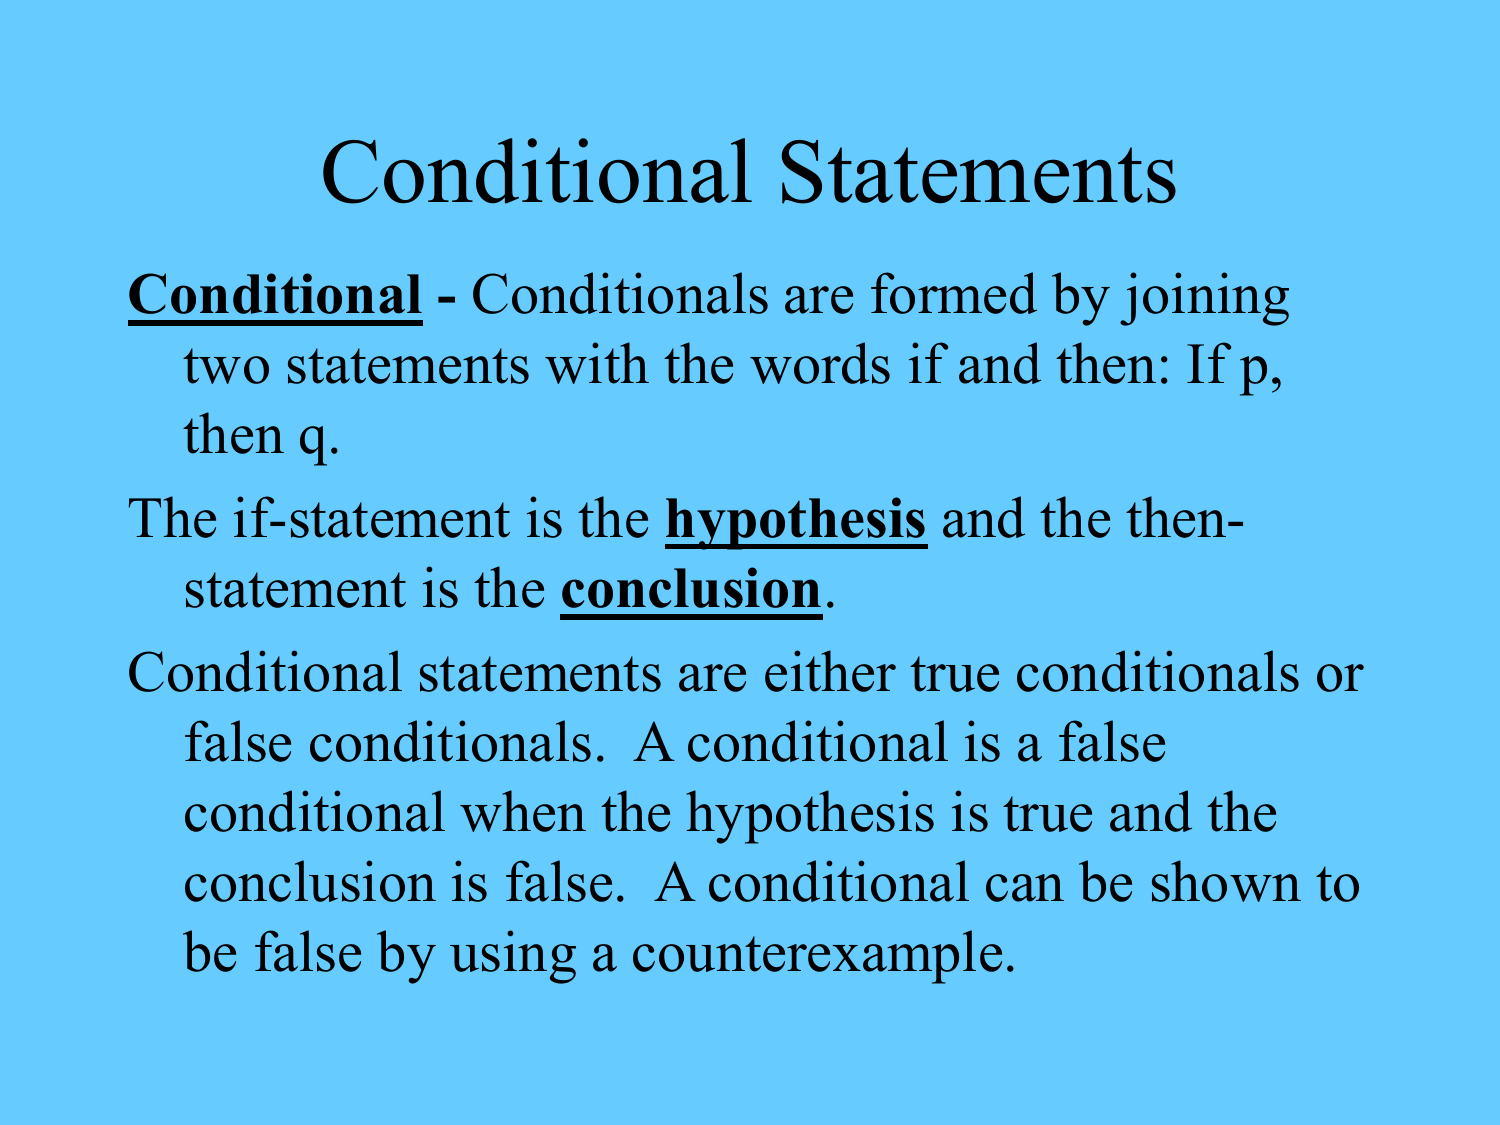 conditional statement with hypothesis